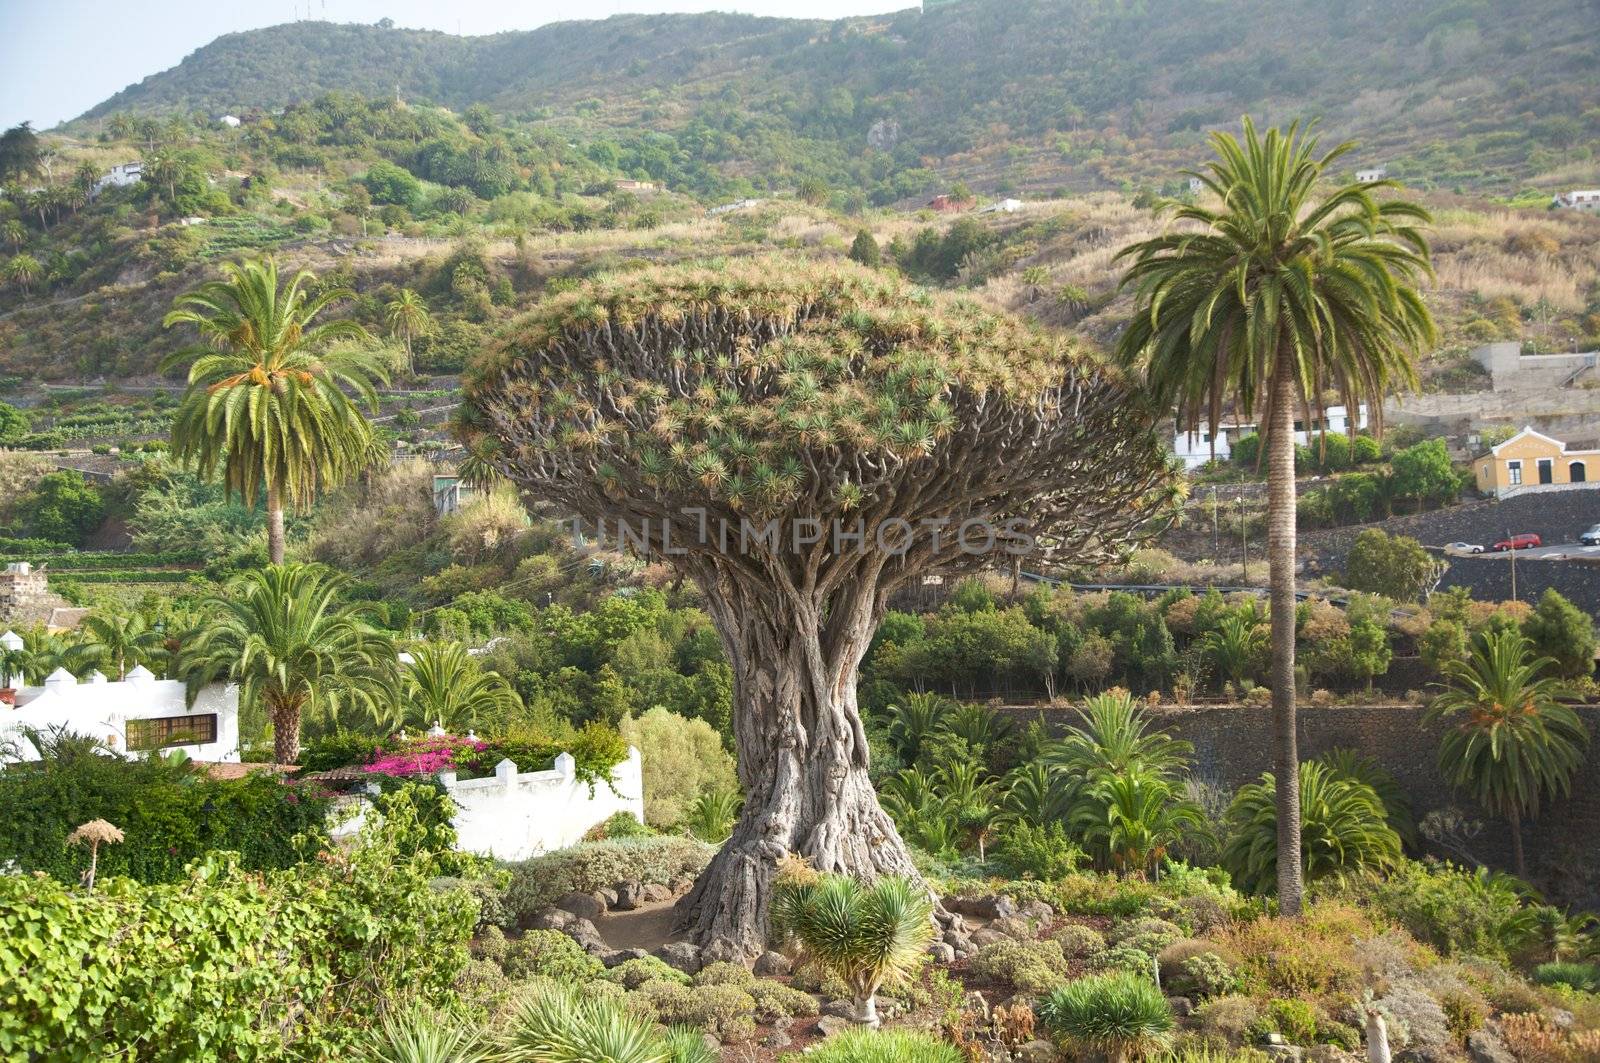 drago is the famous tree in canary islands spain 800 years old